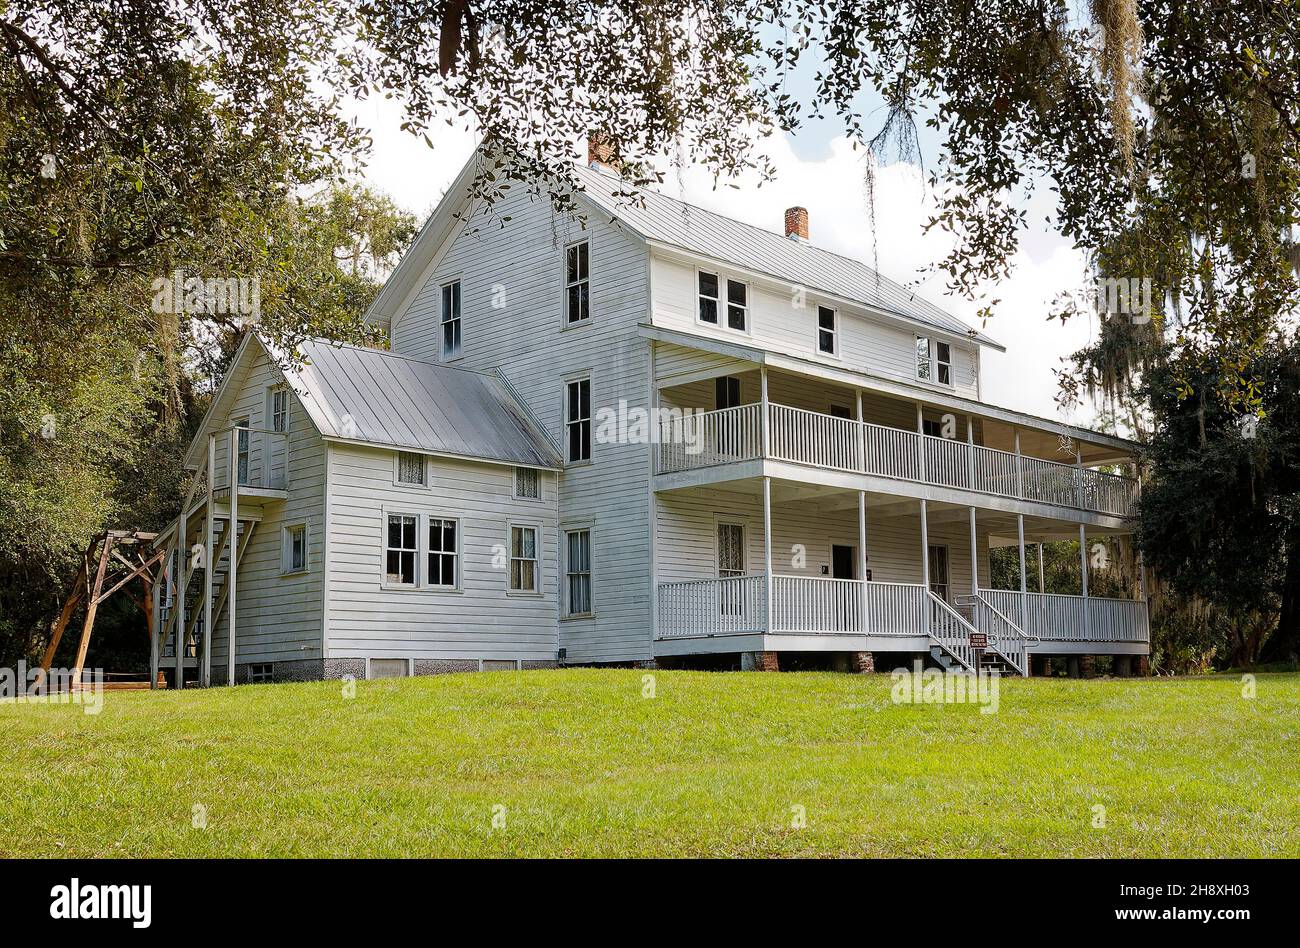 Louis P. Thursby house, 1872, 3 story, monument to central Florida's frontier days, white, large porches, constructed of pine, historic, National Regi Stock Photo